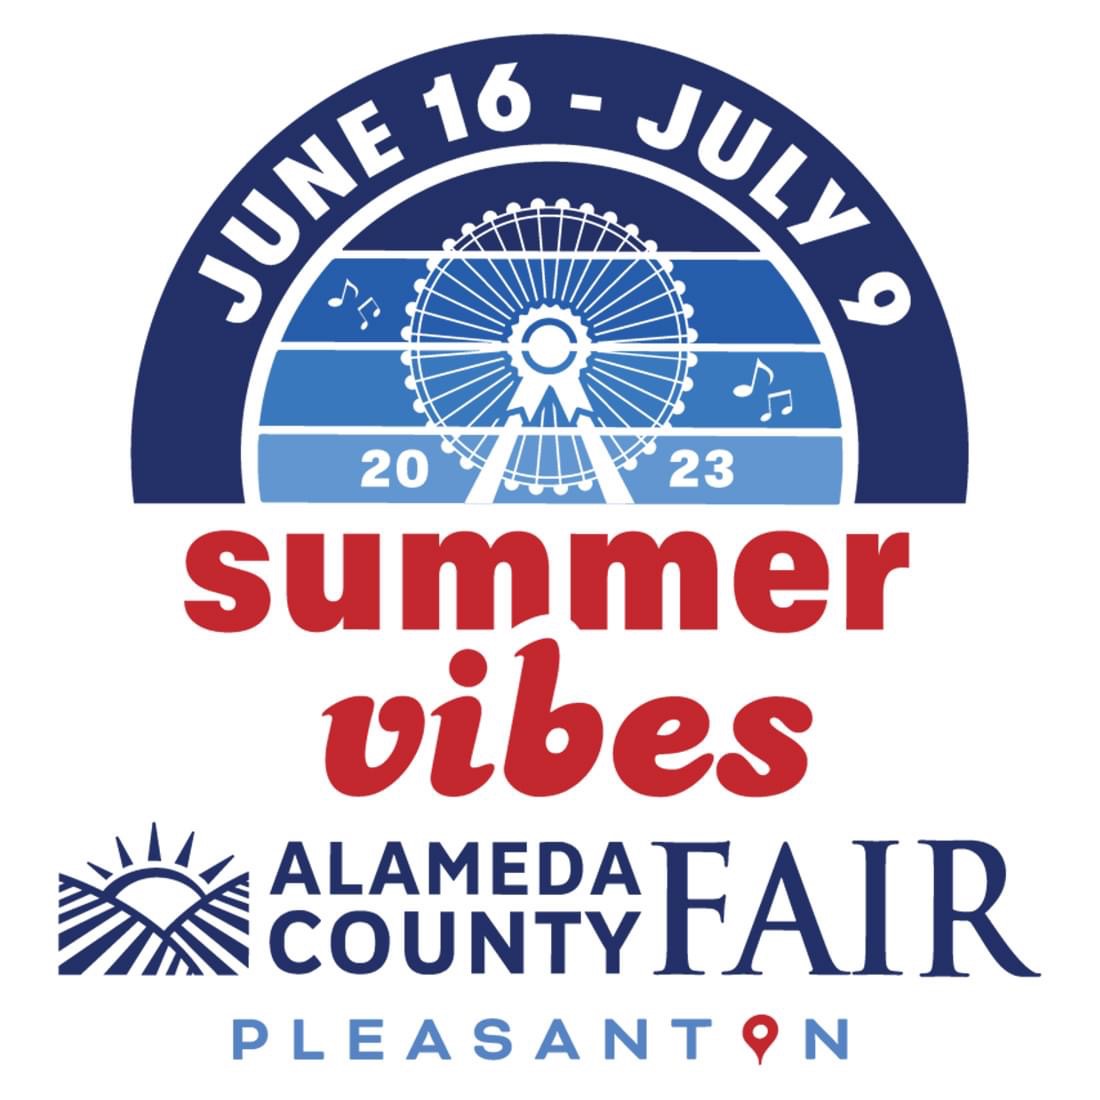 Win Tickets to the Alameda County Fair!